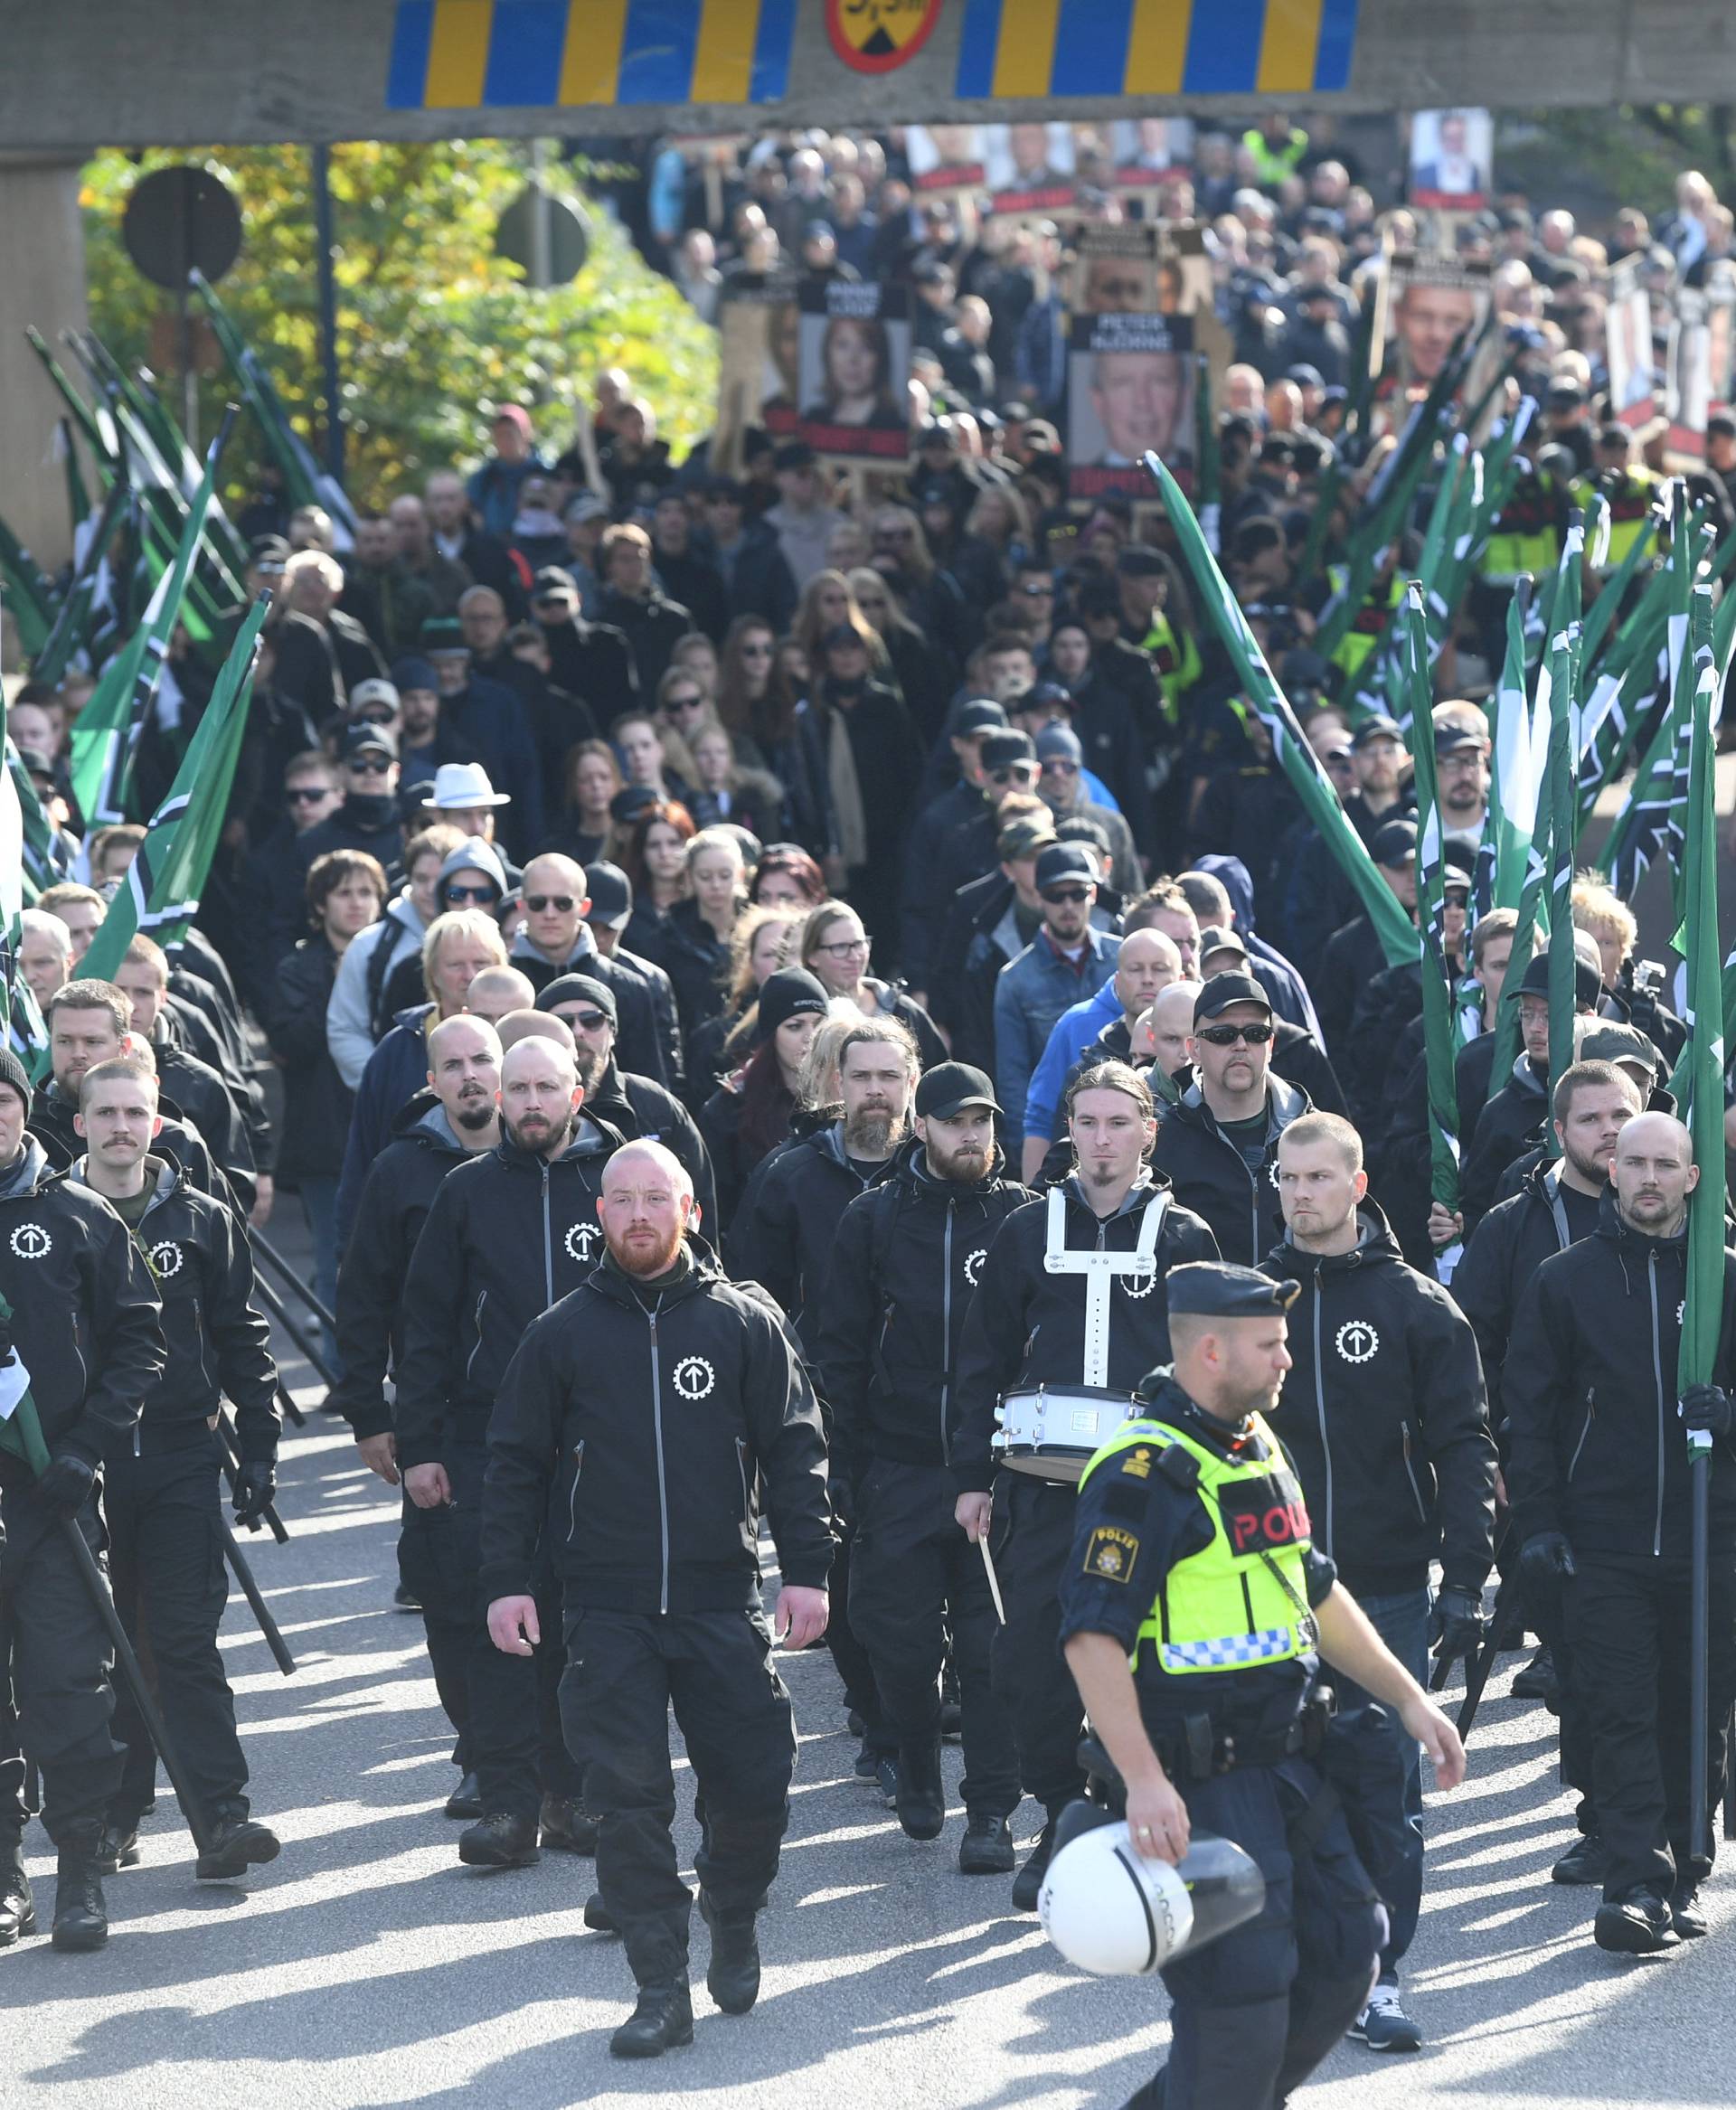 The Nordic Resistance Movement (NMR) march in central Gothenburg, Sweden